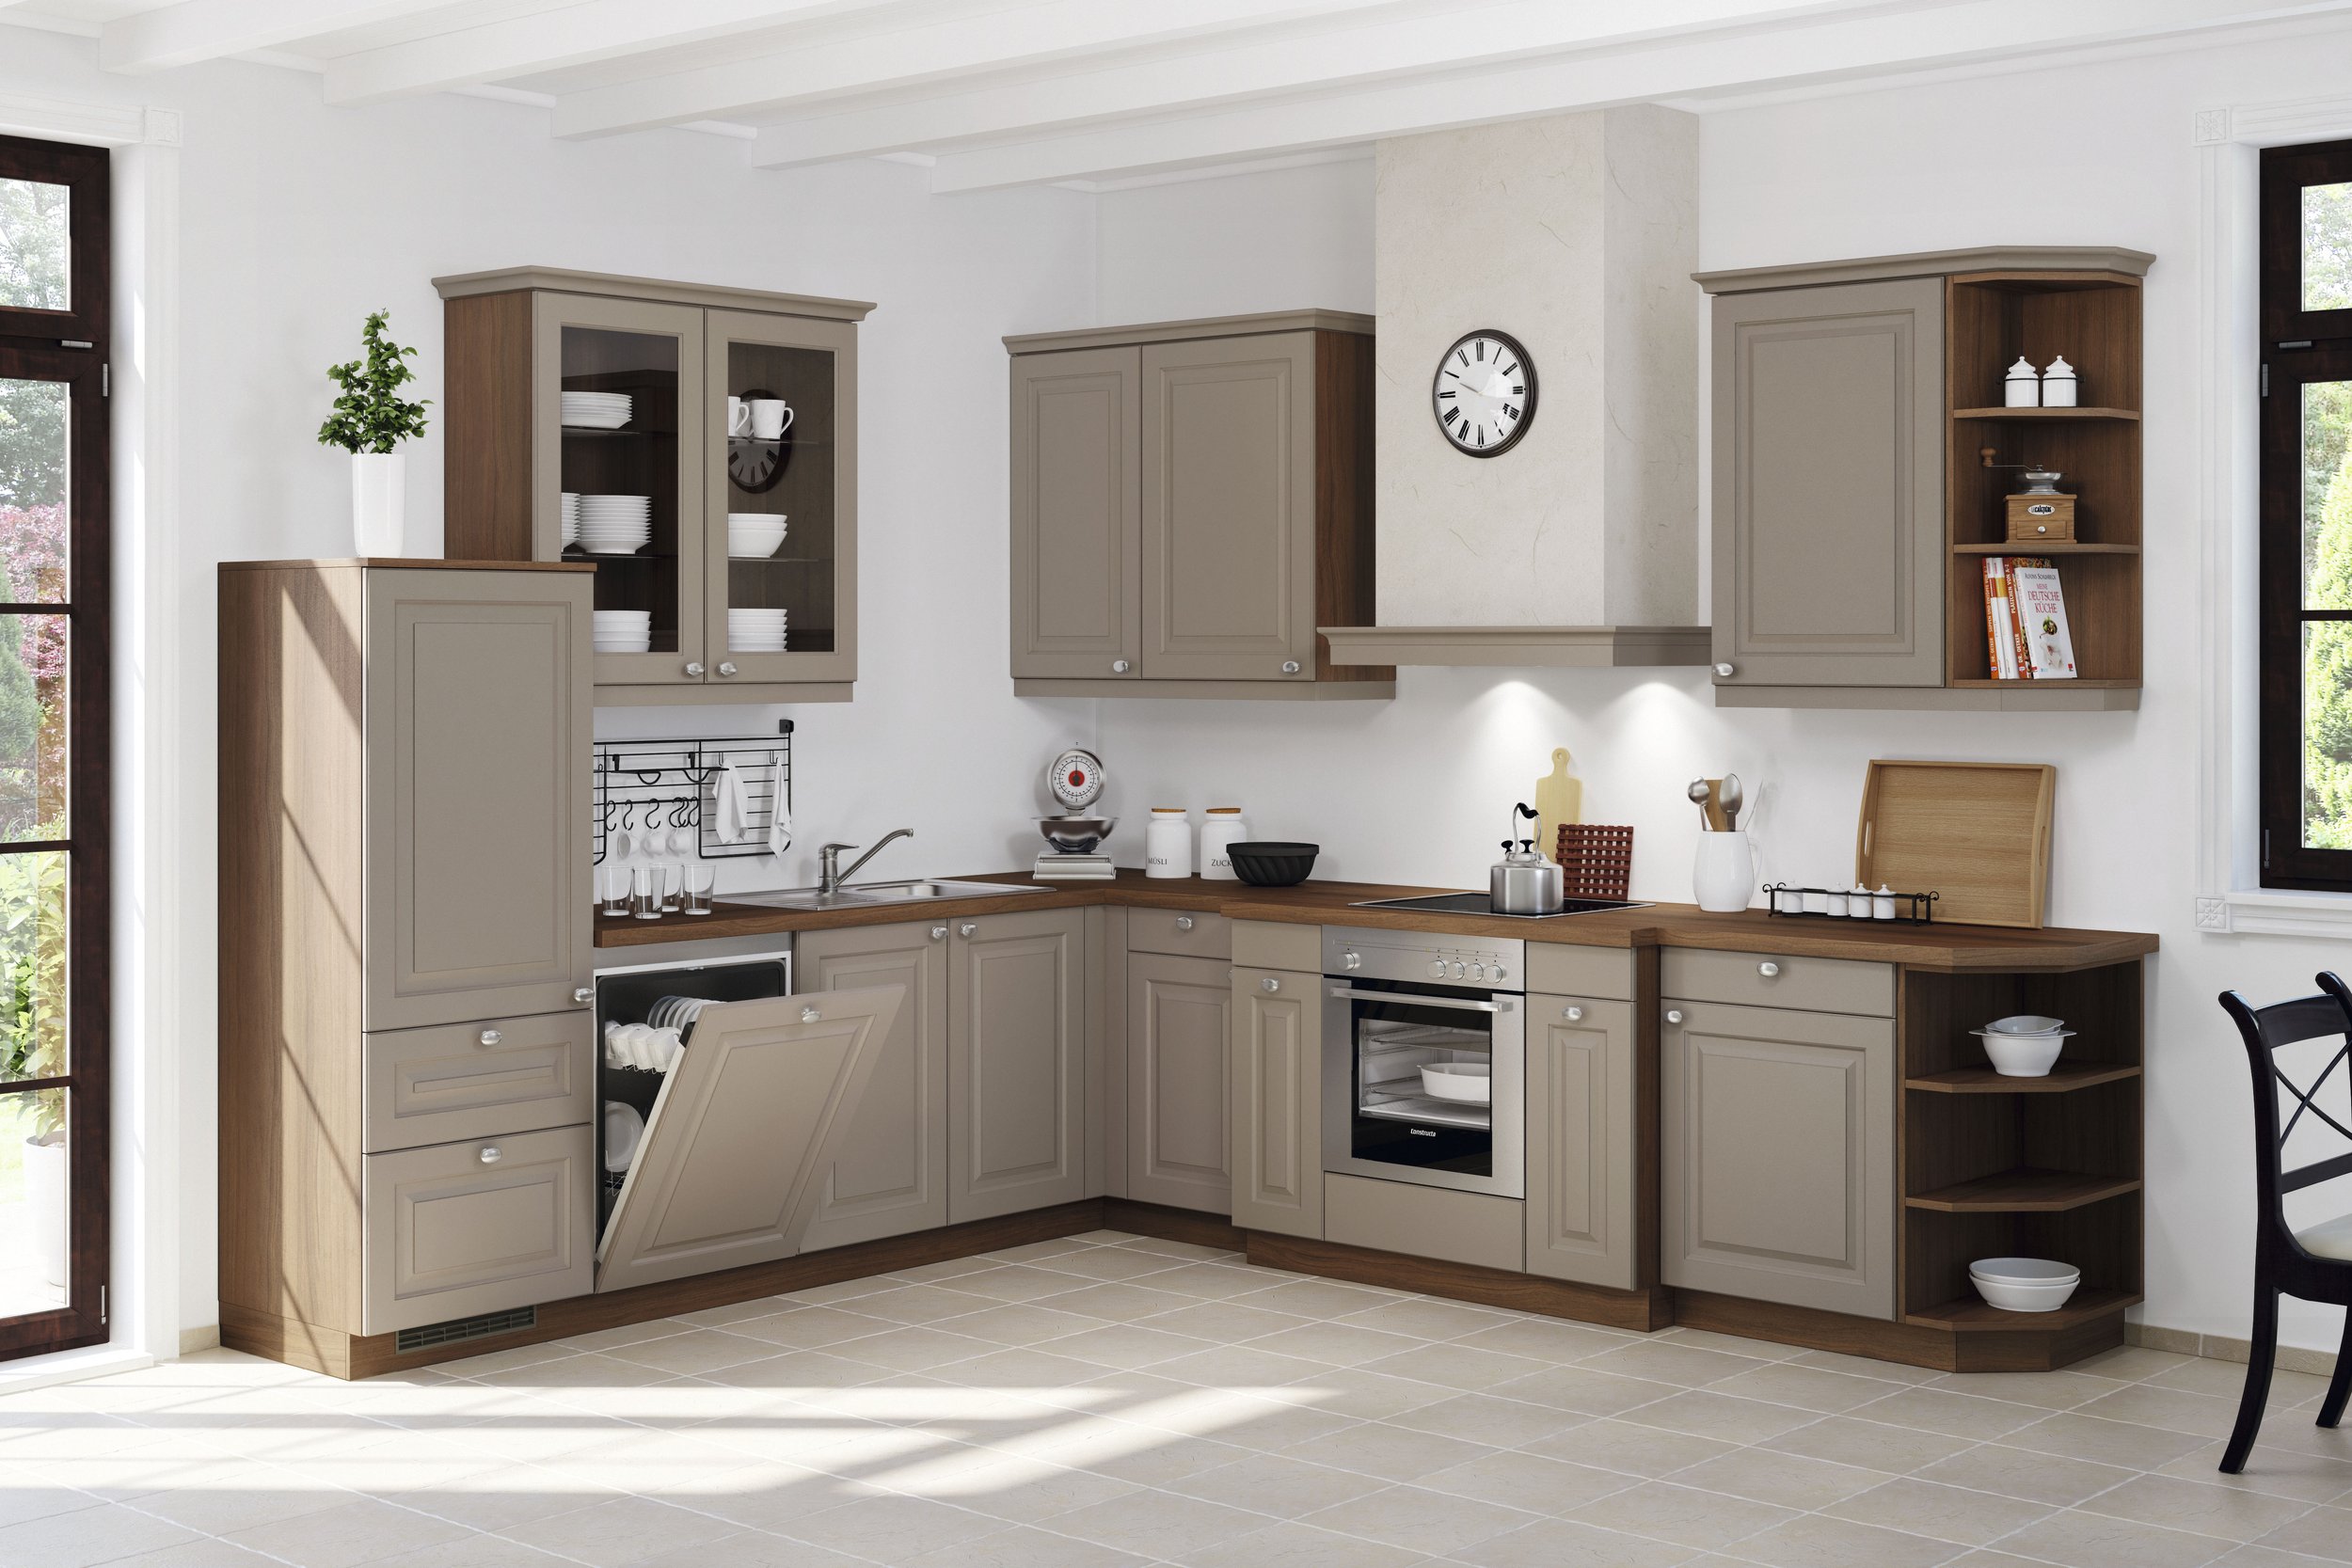 Oak kitchen cabinets are a popular options